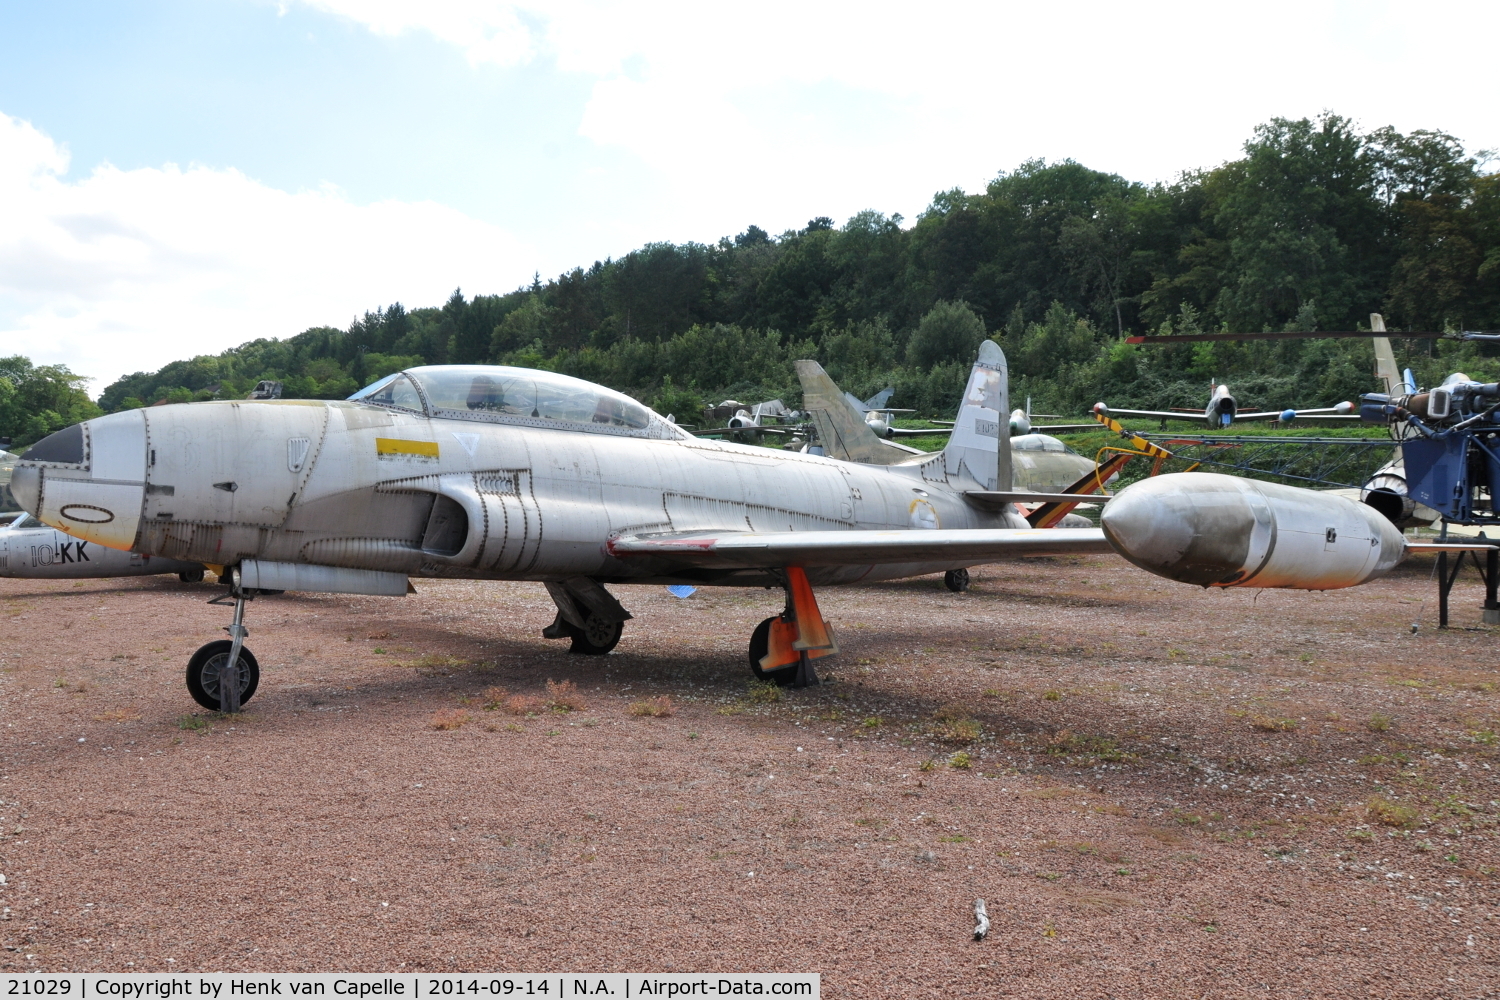 21029, Canadair T-33AN Silver Star 3 C/N T33-029, French Air Force T-33 at the Chateau de Savigny aircraft museum. Also flew with RCAF.